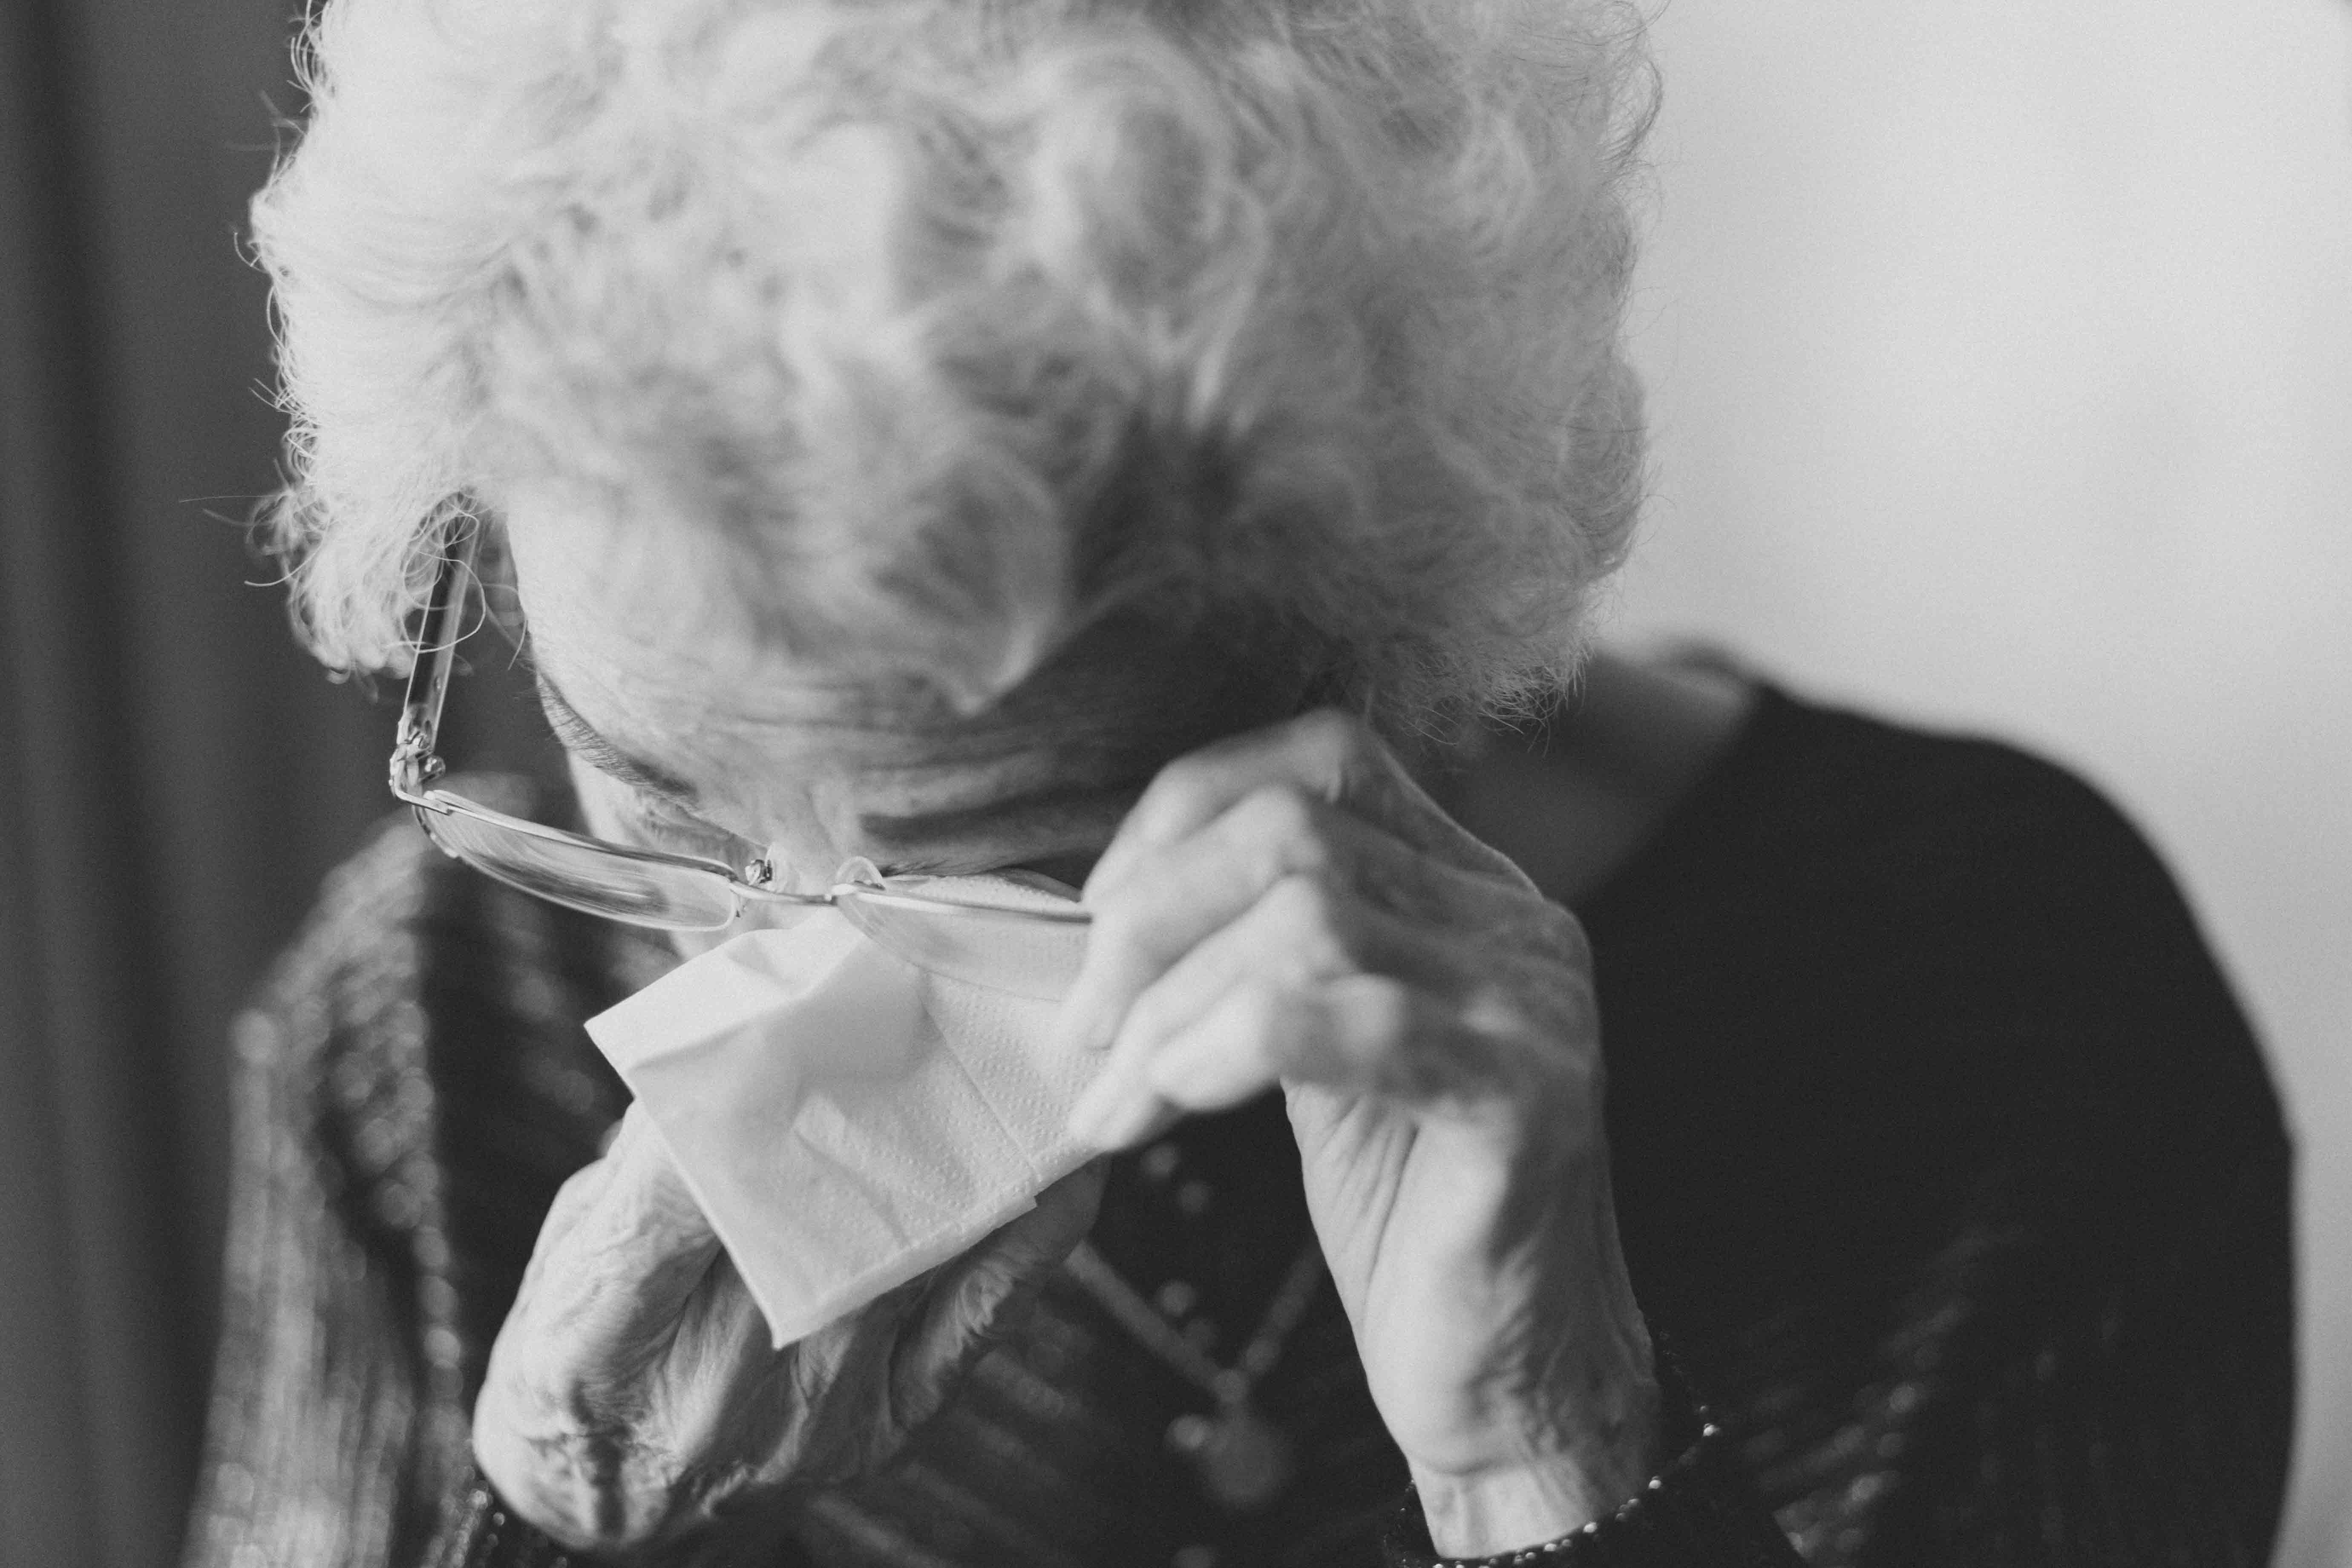 The older woman bursts into tears after seeing the bill | Photo: Unsplash 